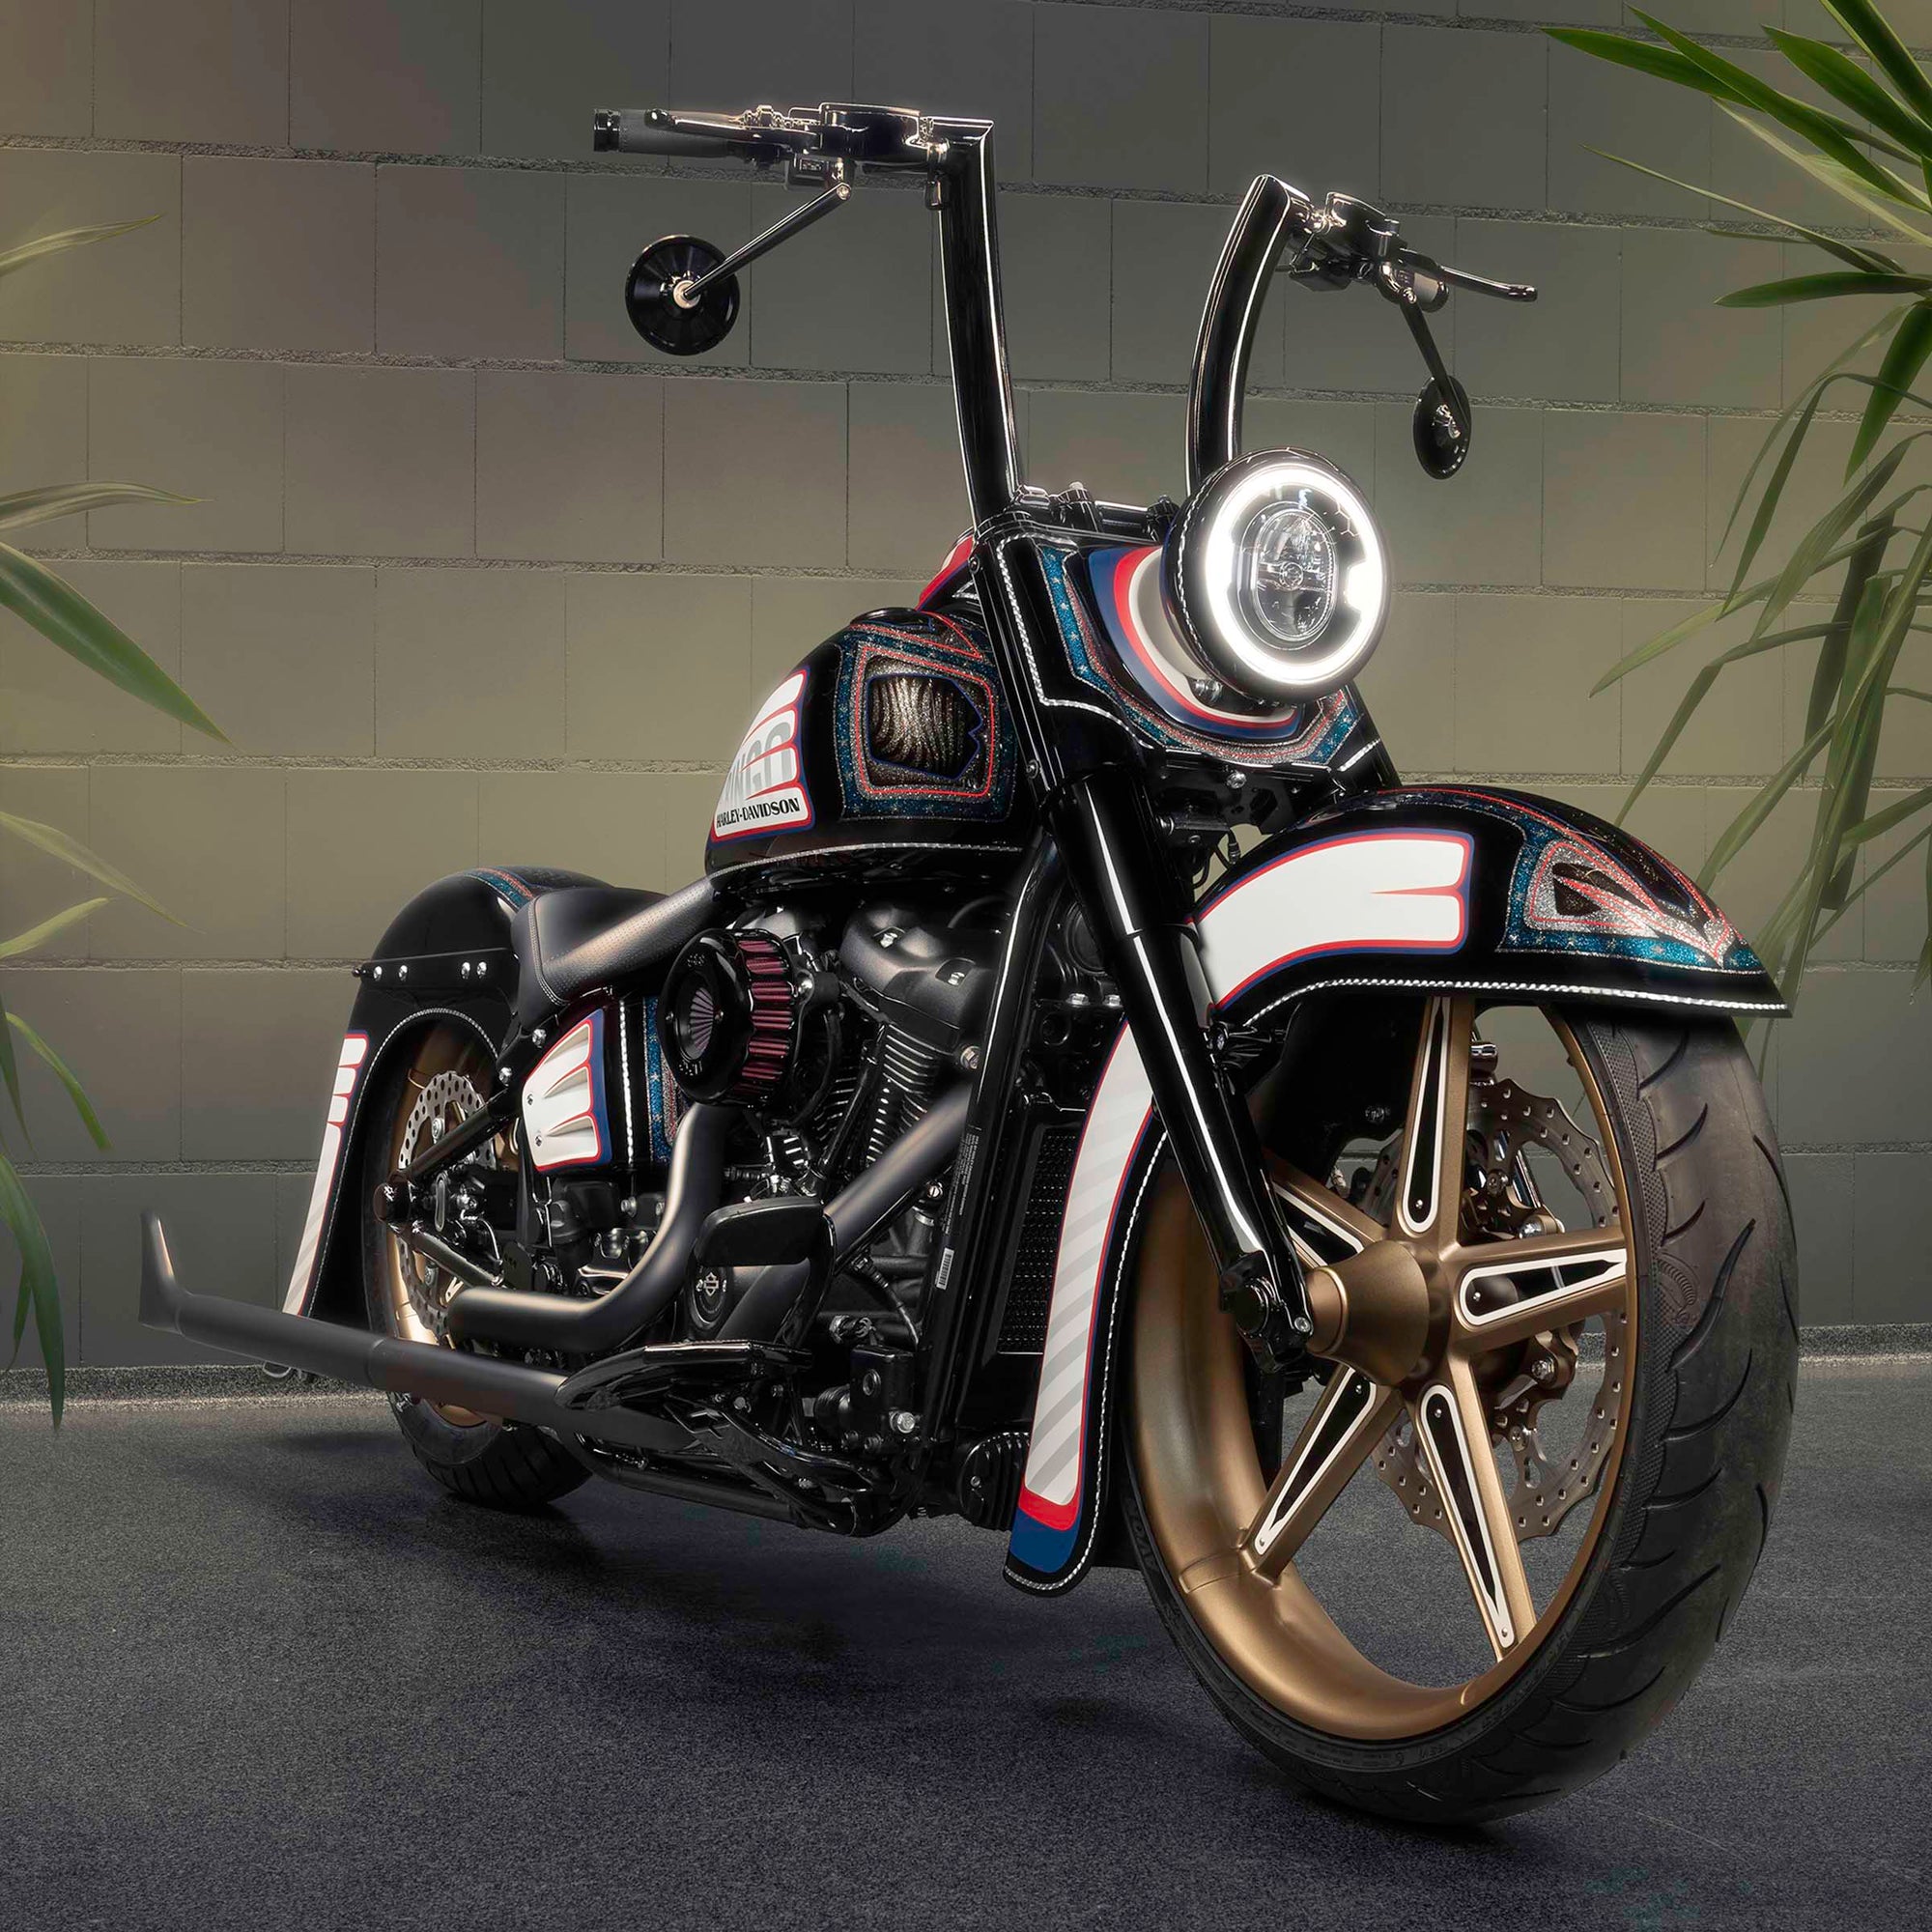 Modified Harley Davidson Heritage motorcycle with Killer Custom parts from the front with some house plants in the background